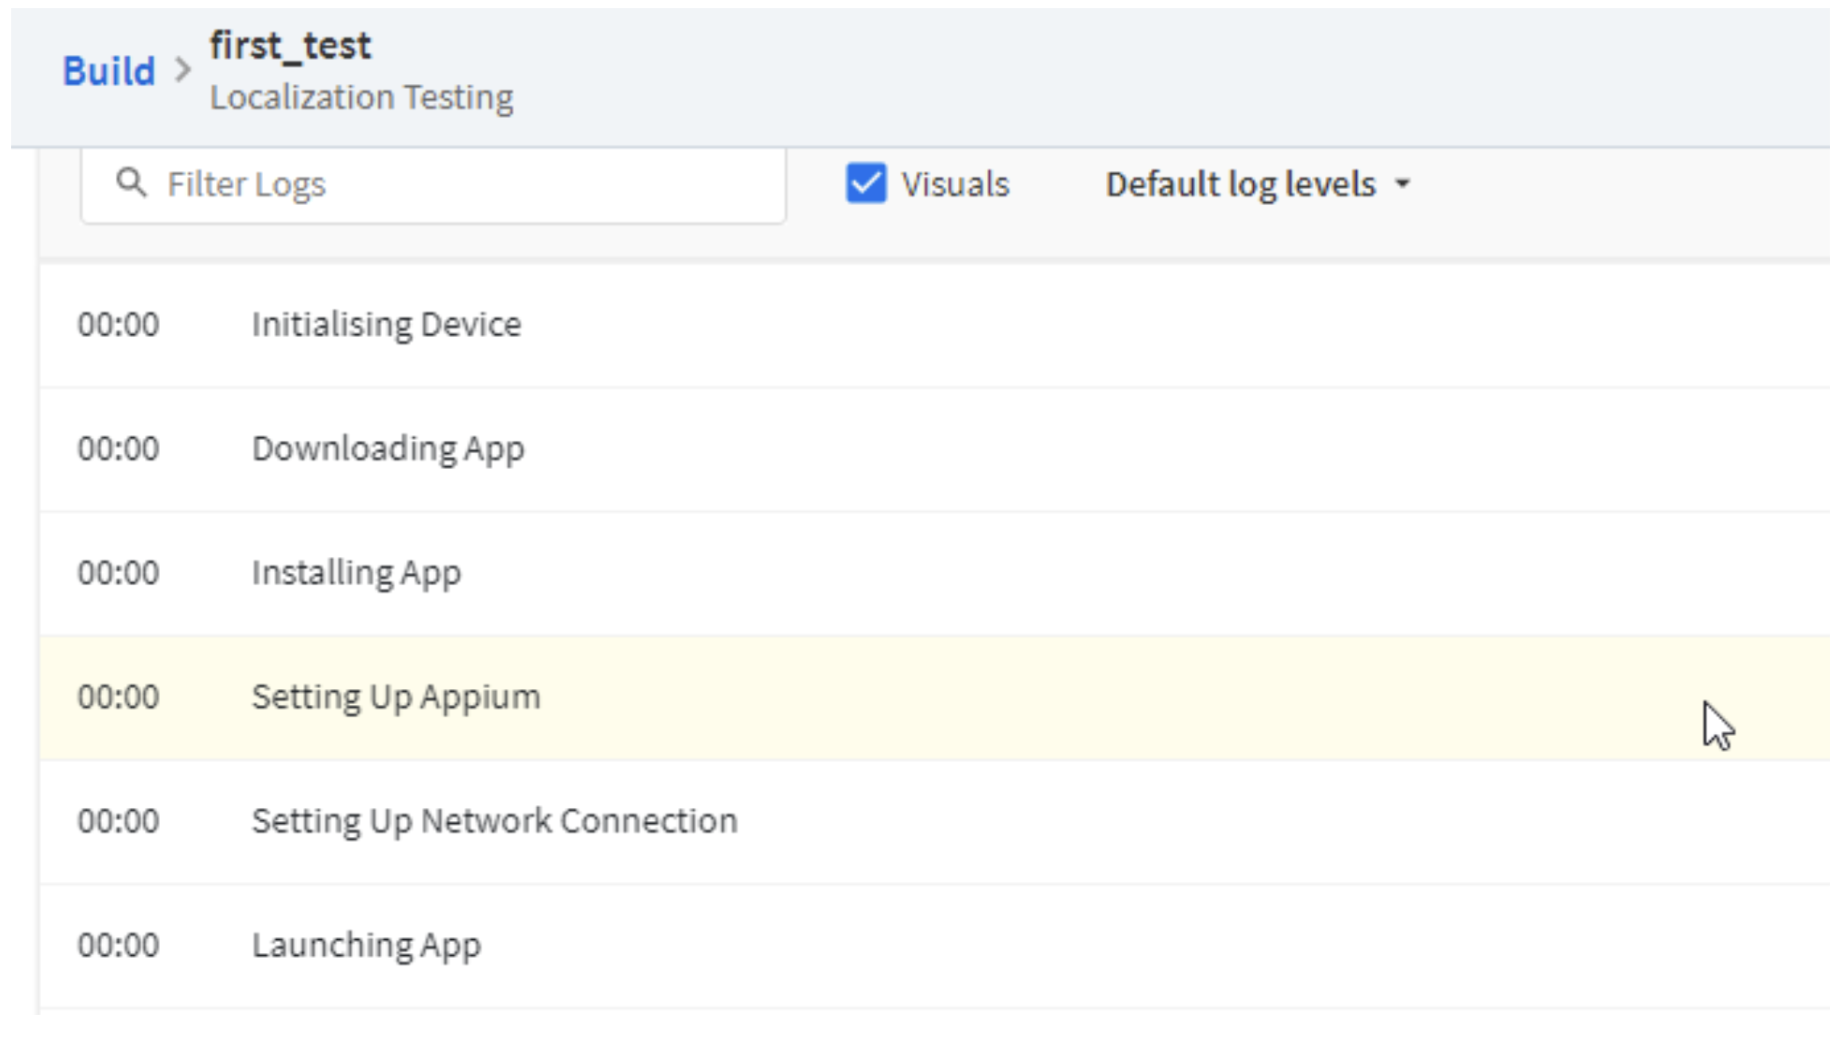 Appium logs on BrowserStack